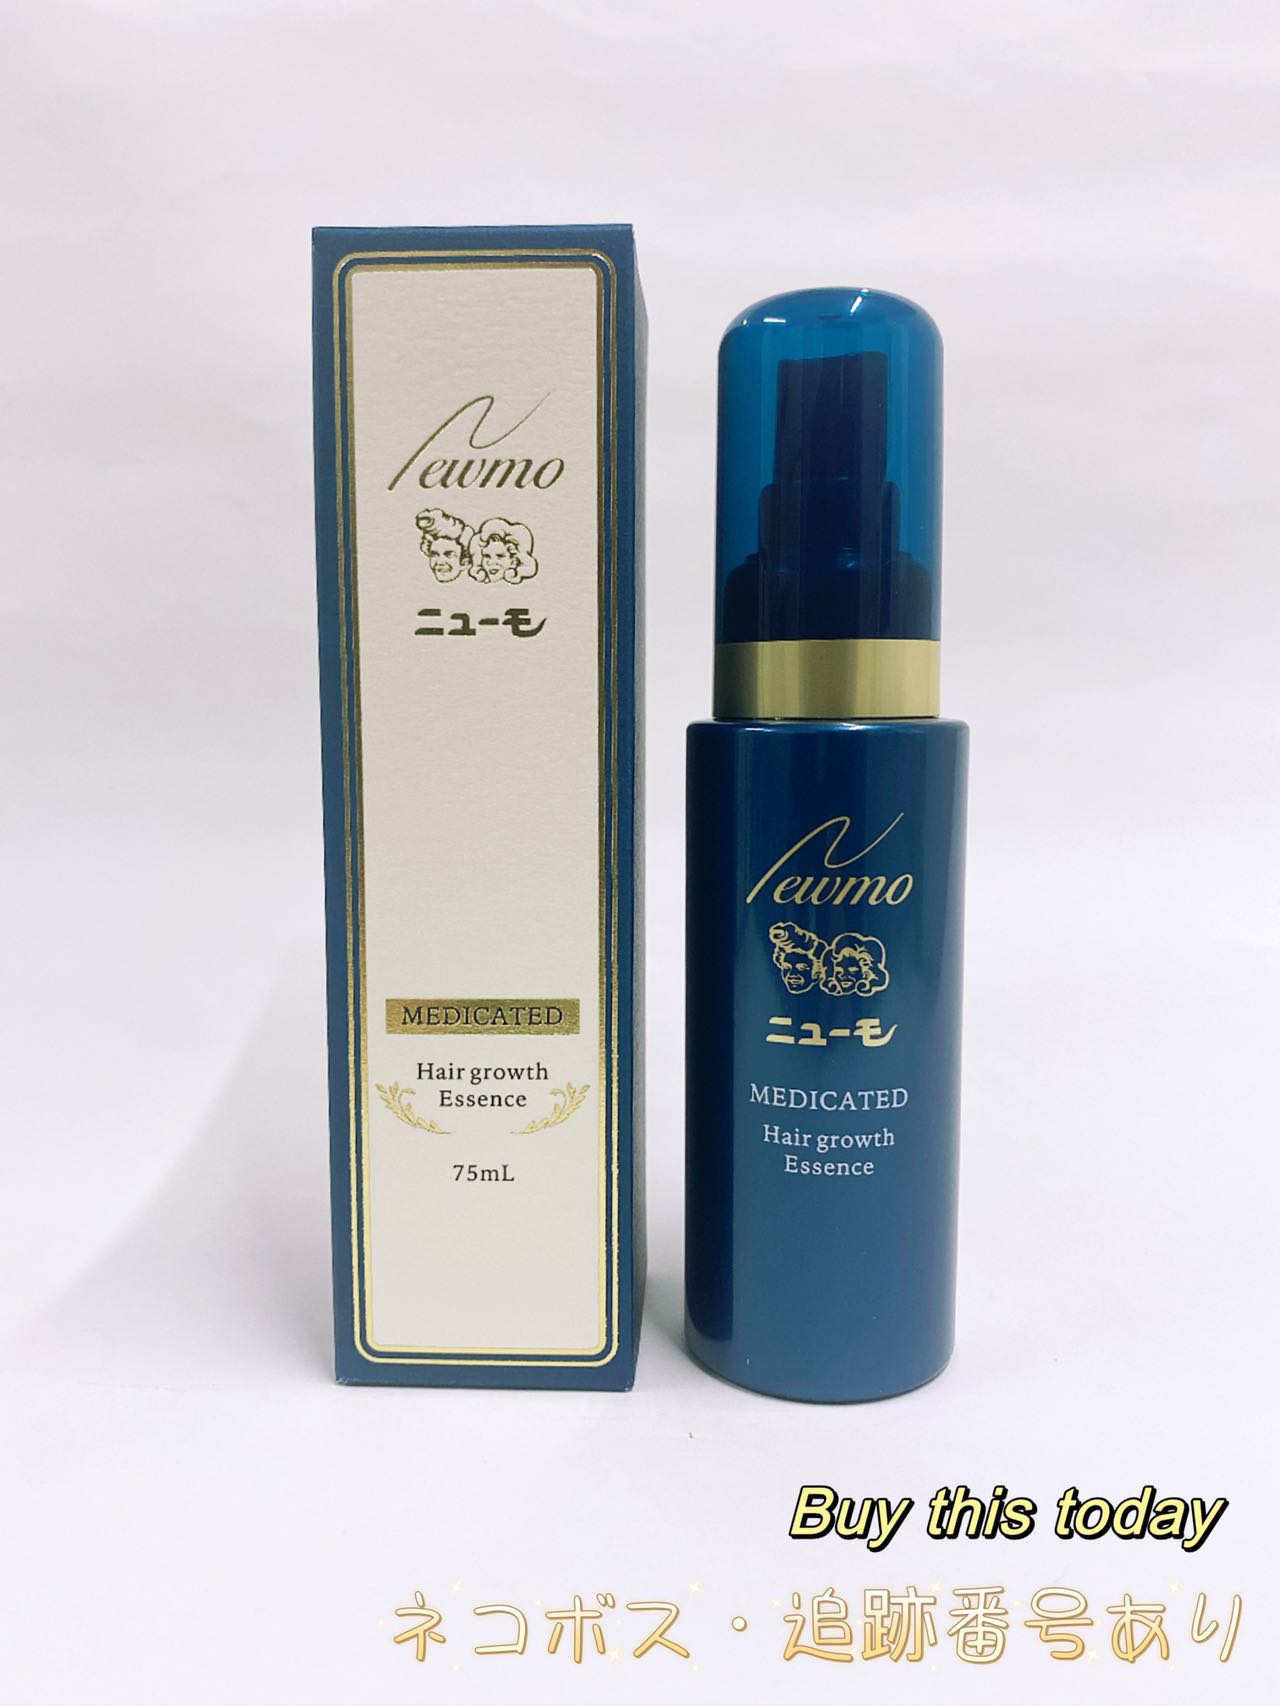  new mo75ml hair restoration tonic man and woman use scalp care hair restoration ..... no addition new monewmo cat pohs posting * pursuit number equipped 